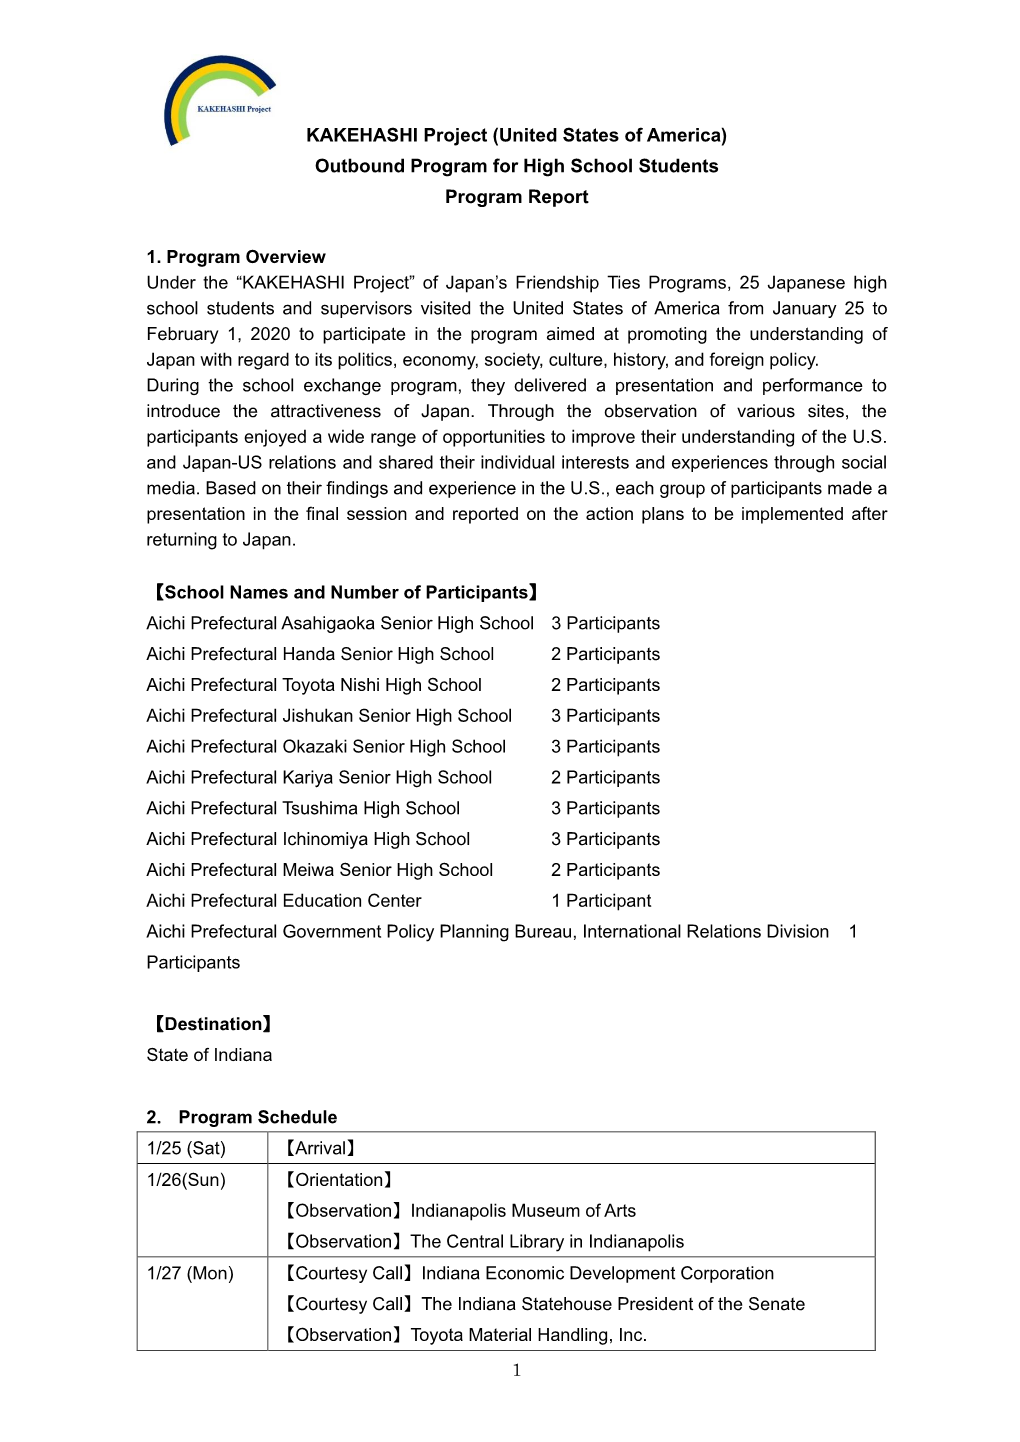 KAKEHASHI Project (United States of America) Outbound Program for High School Students Program Report